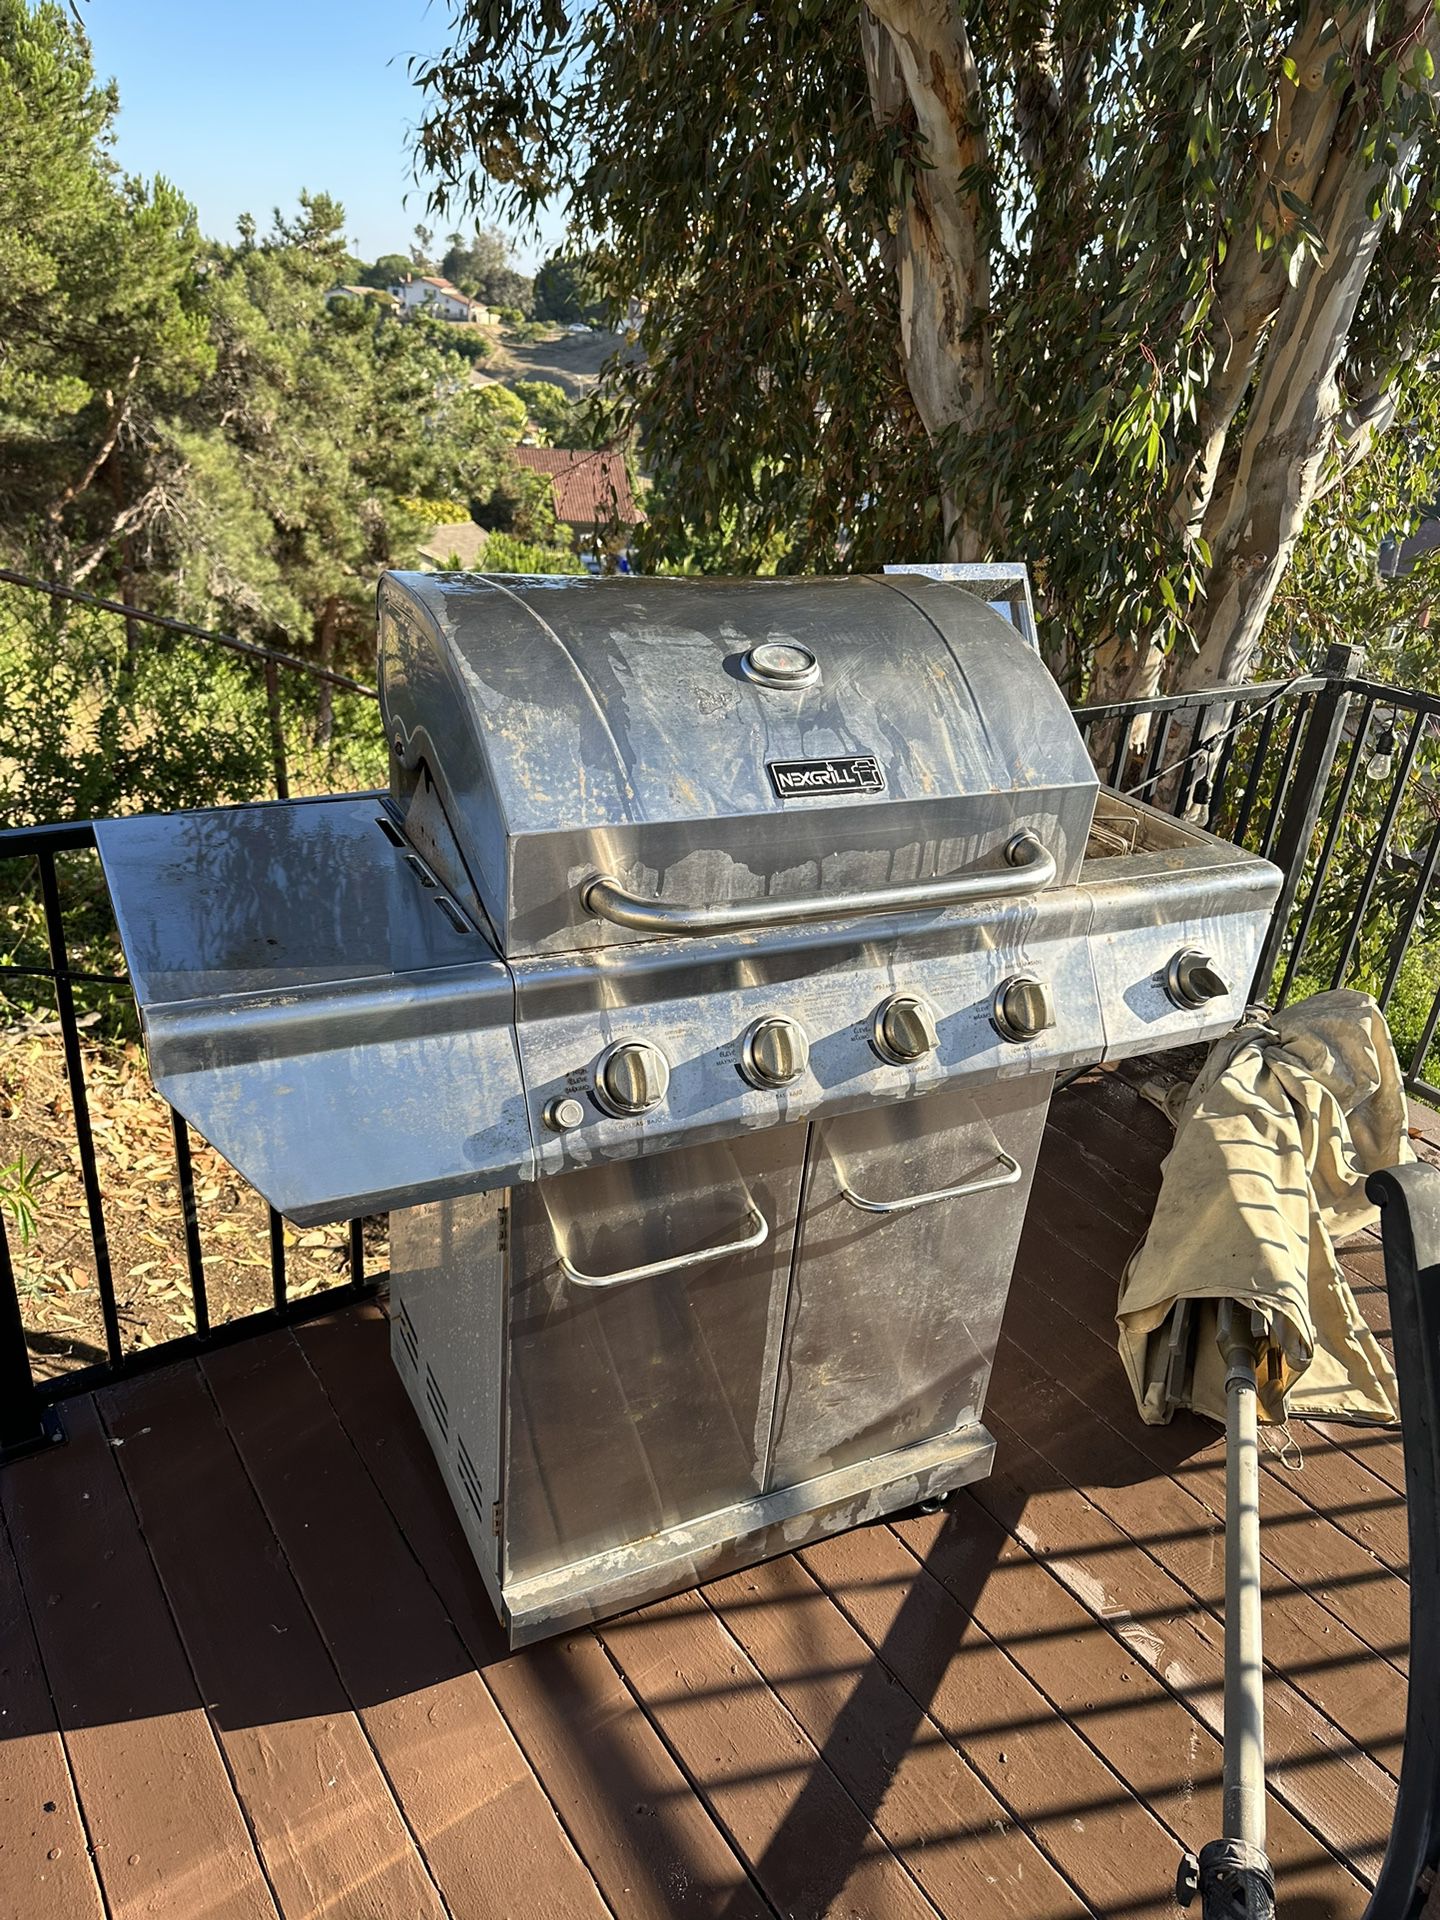 Bbq For Sale $25